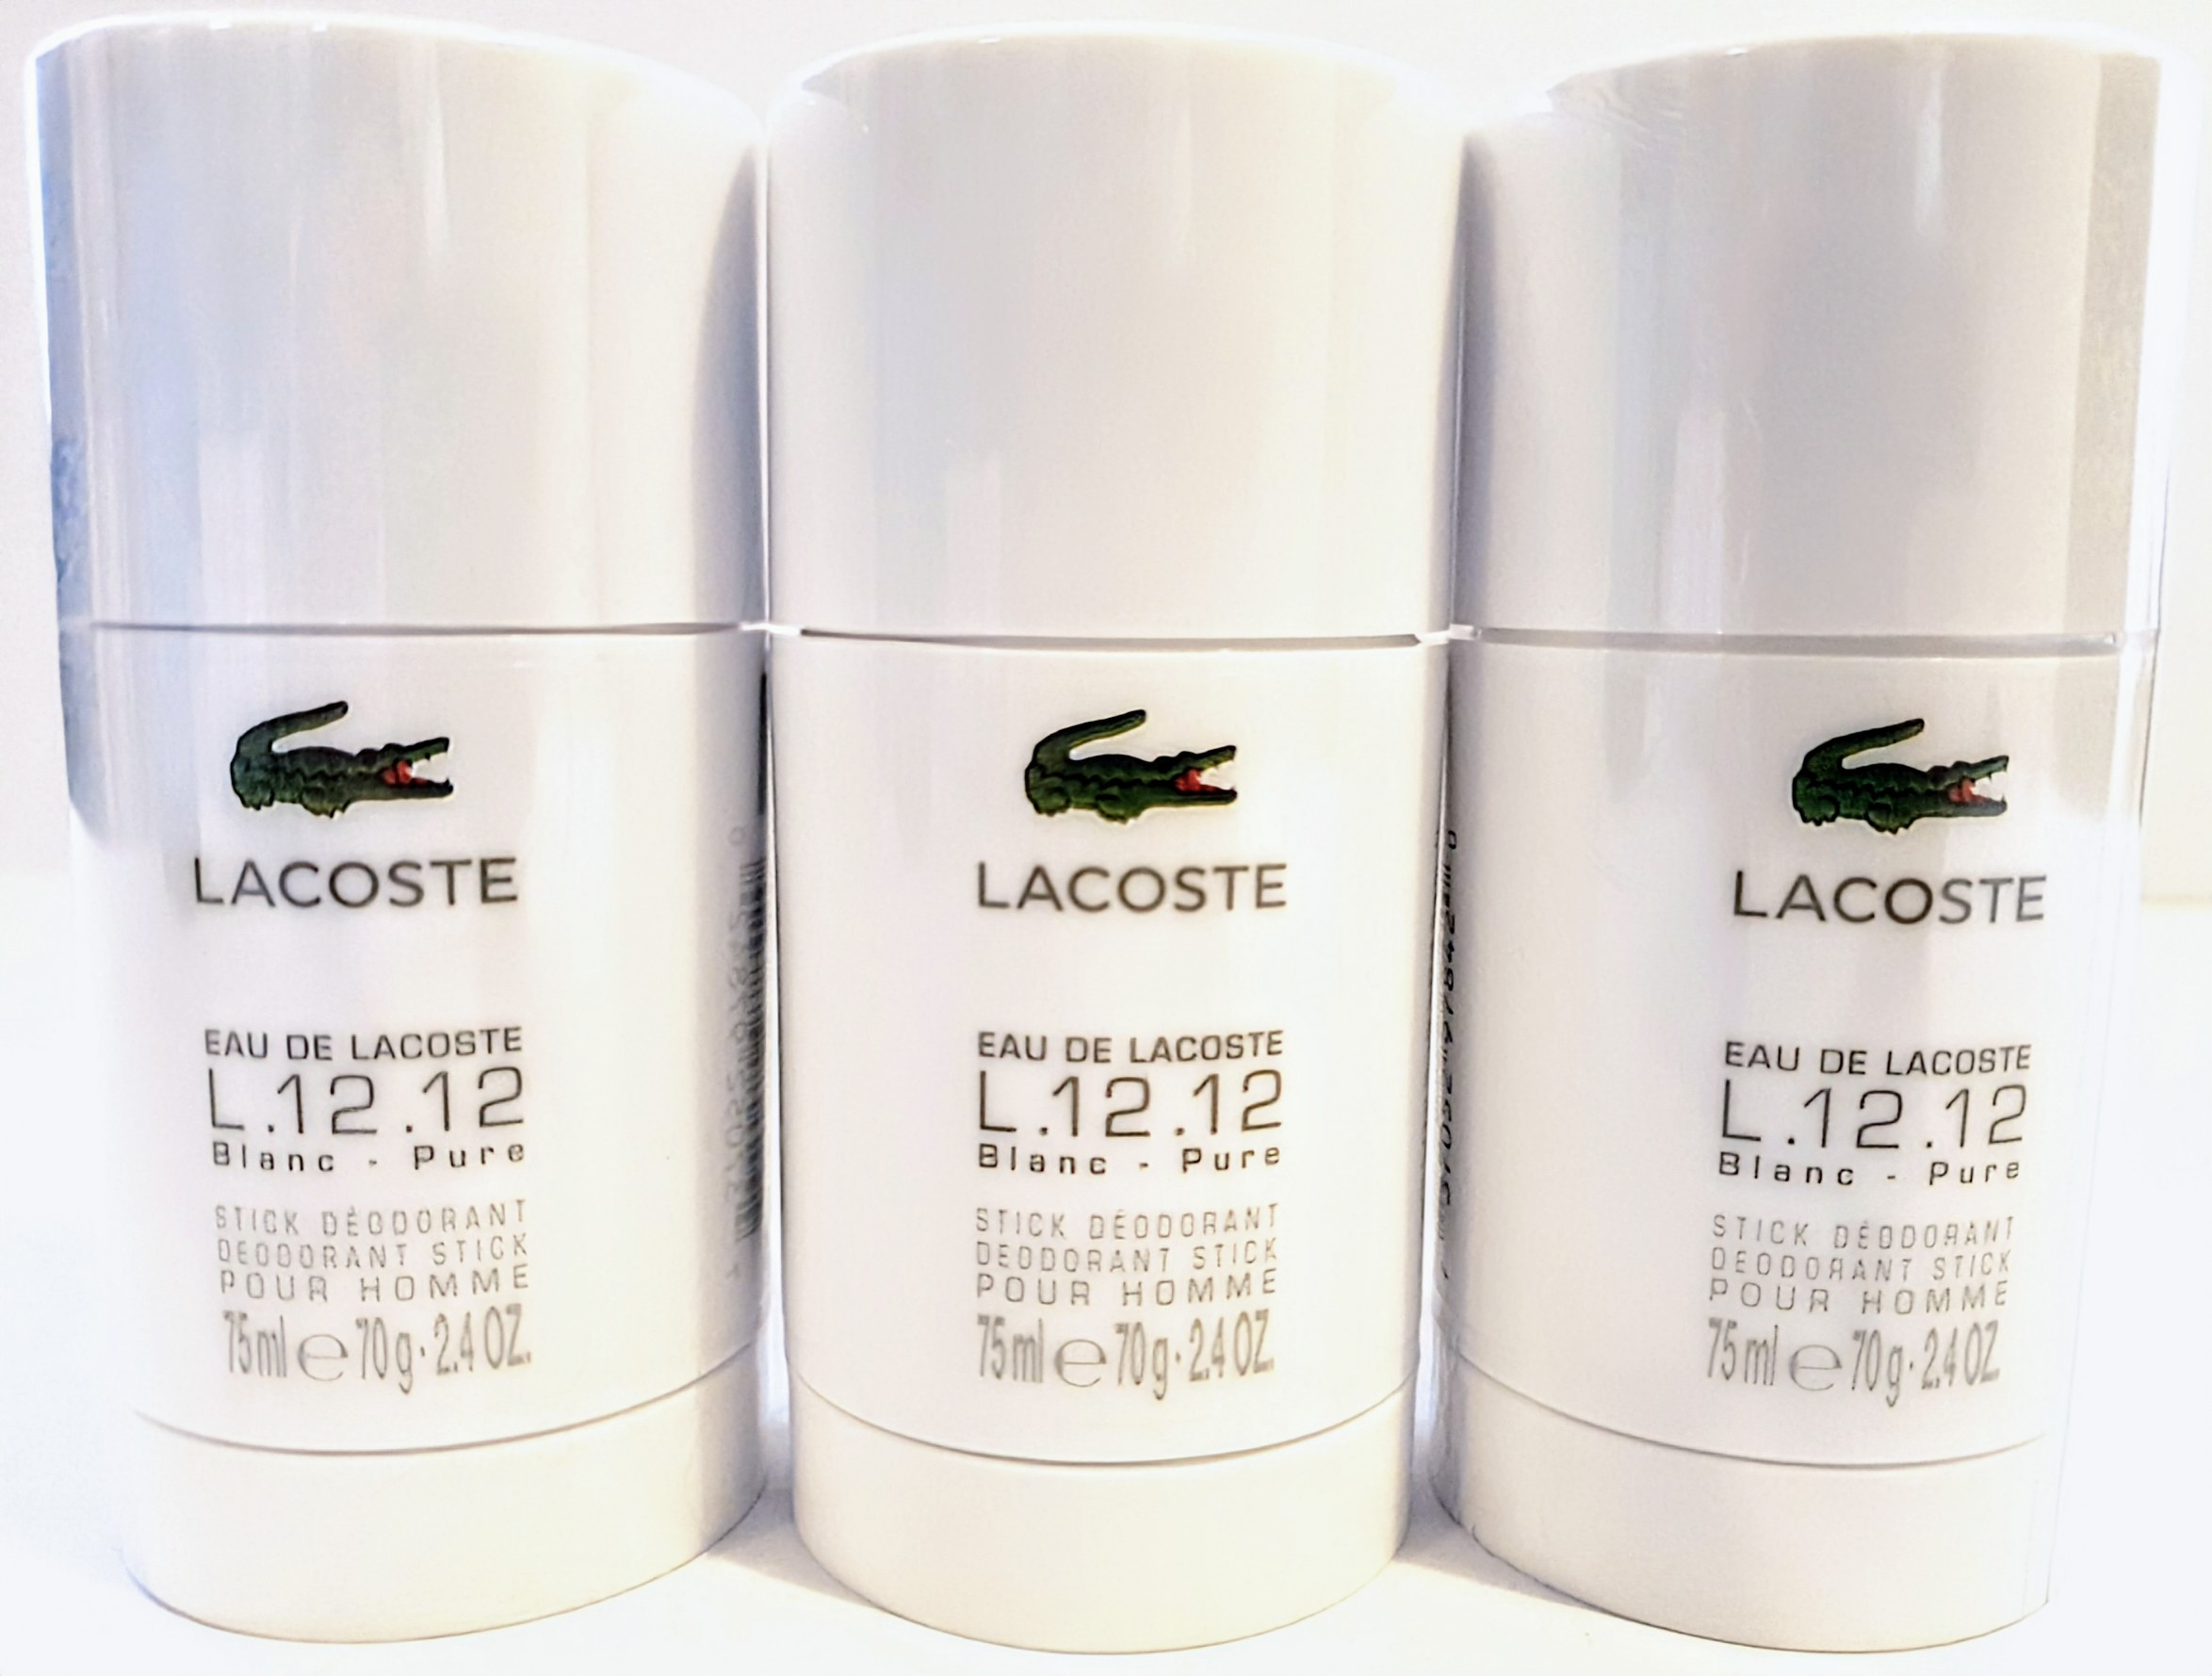 Three Lacoste L.12.12 Blanc Pure stick deodorants for men, each 75ml, displayed side by side.